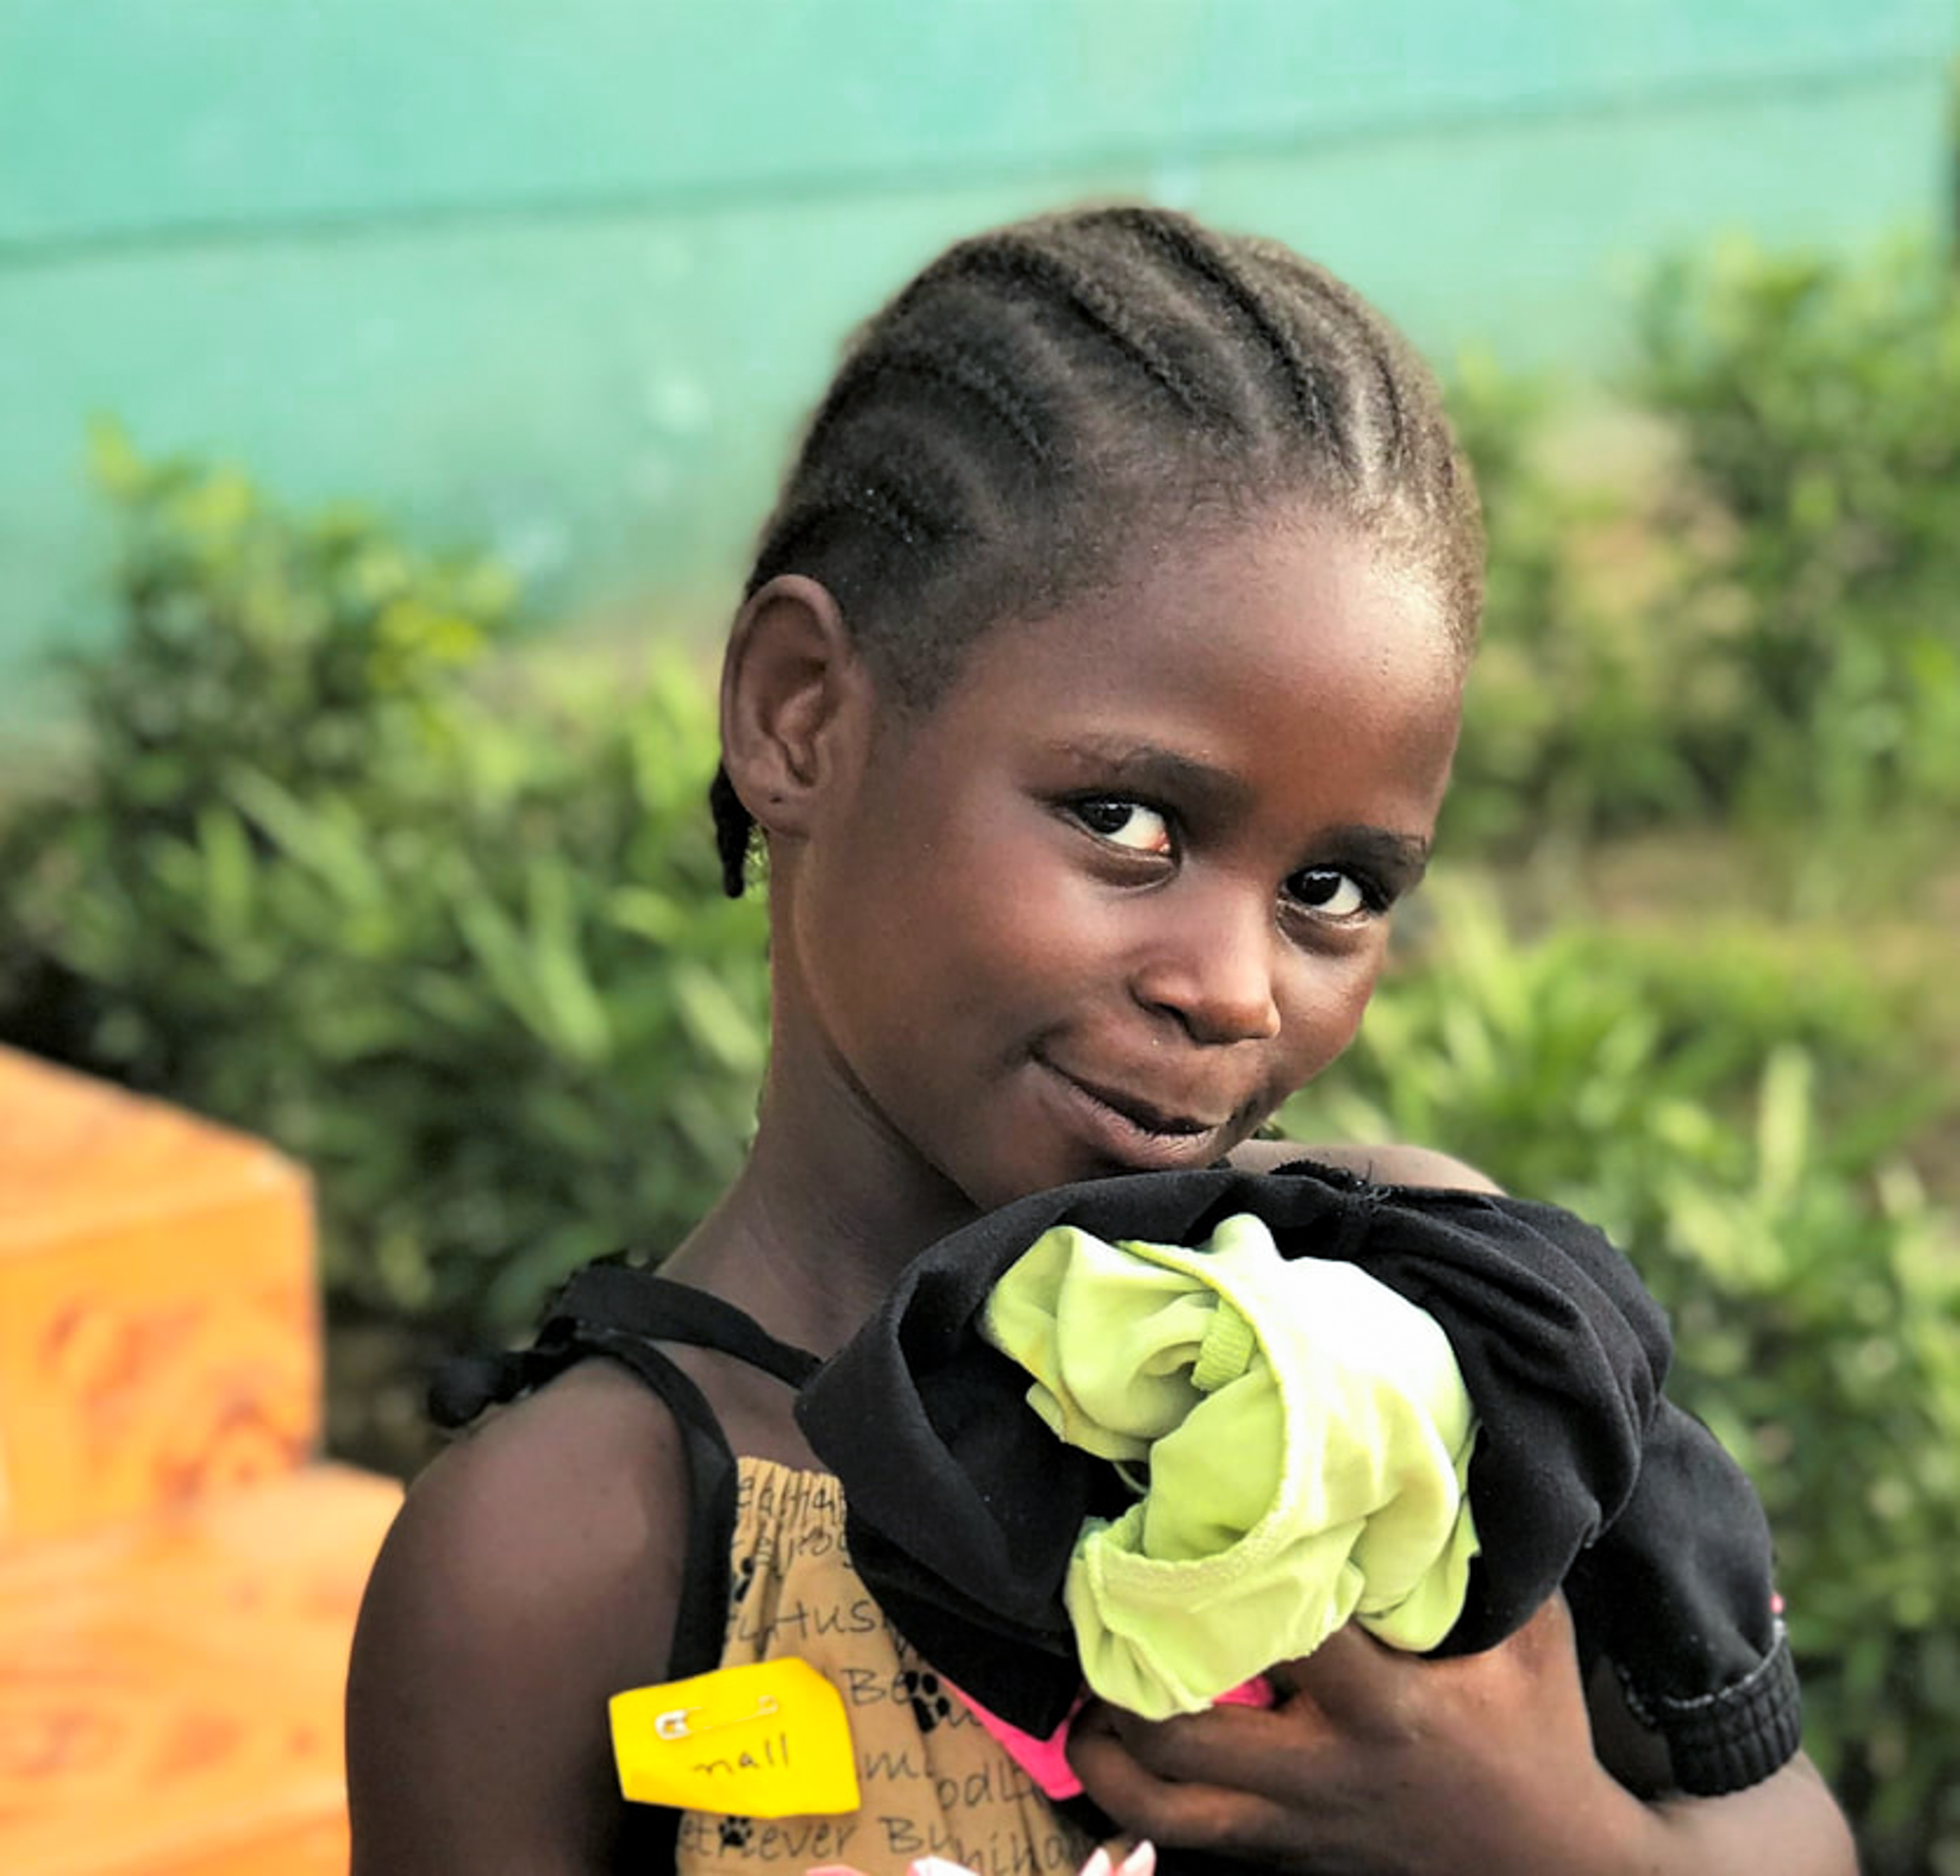 Our Global Village: Partnering with Hope and Care for Children in Liberia